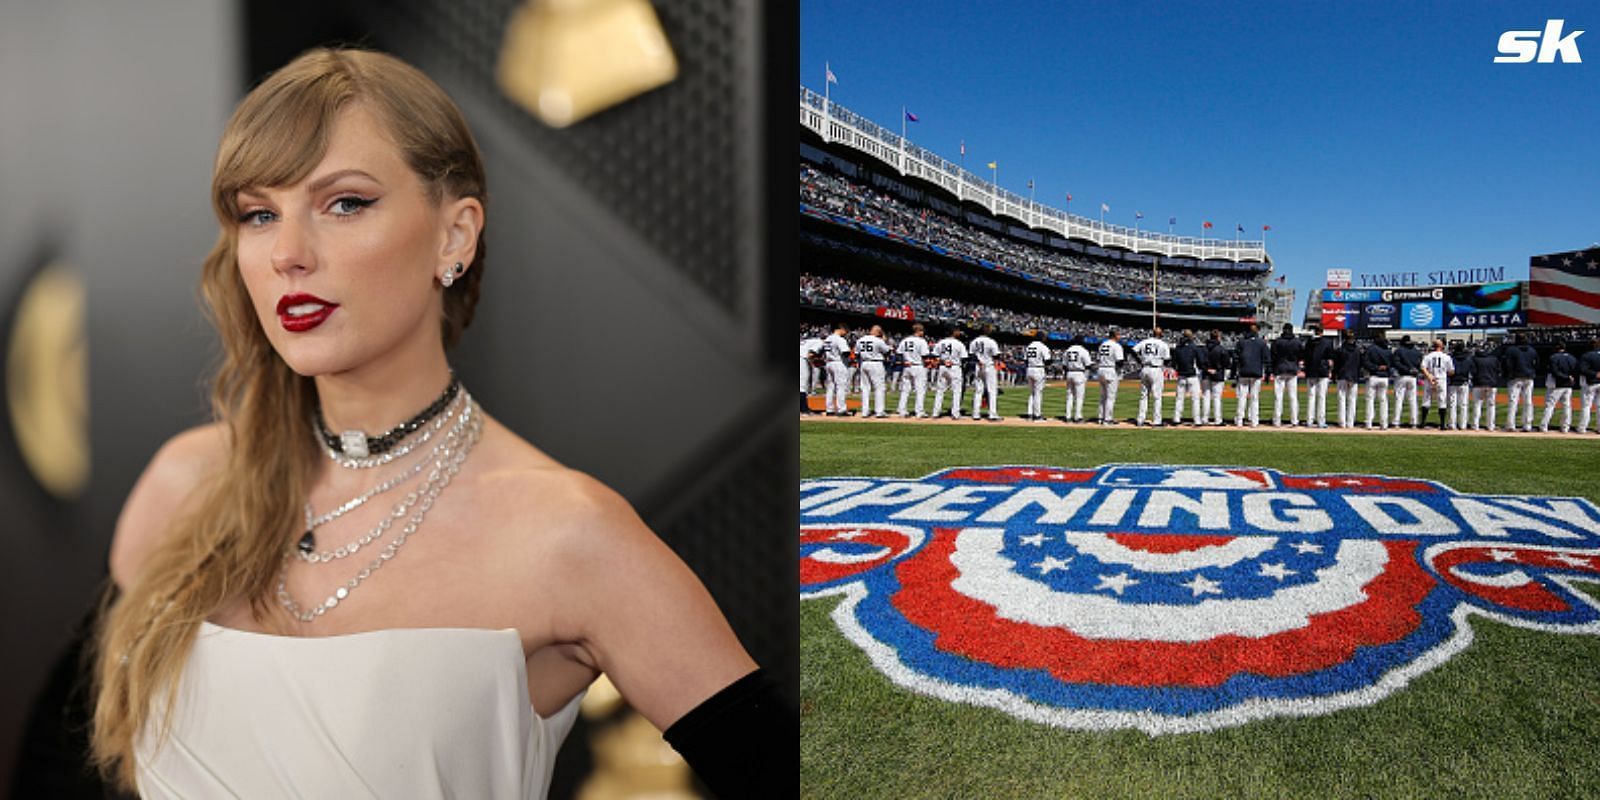 When it comes to her favorite ballclub, Taylor Swift keeps fans guessing